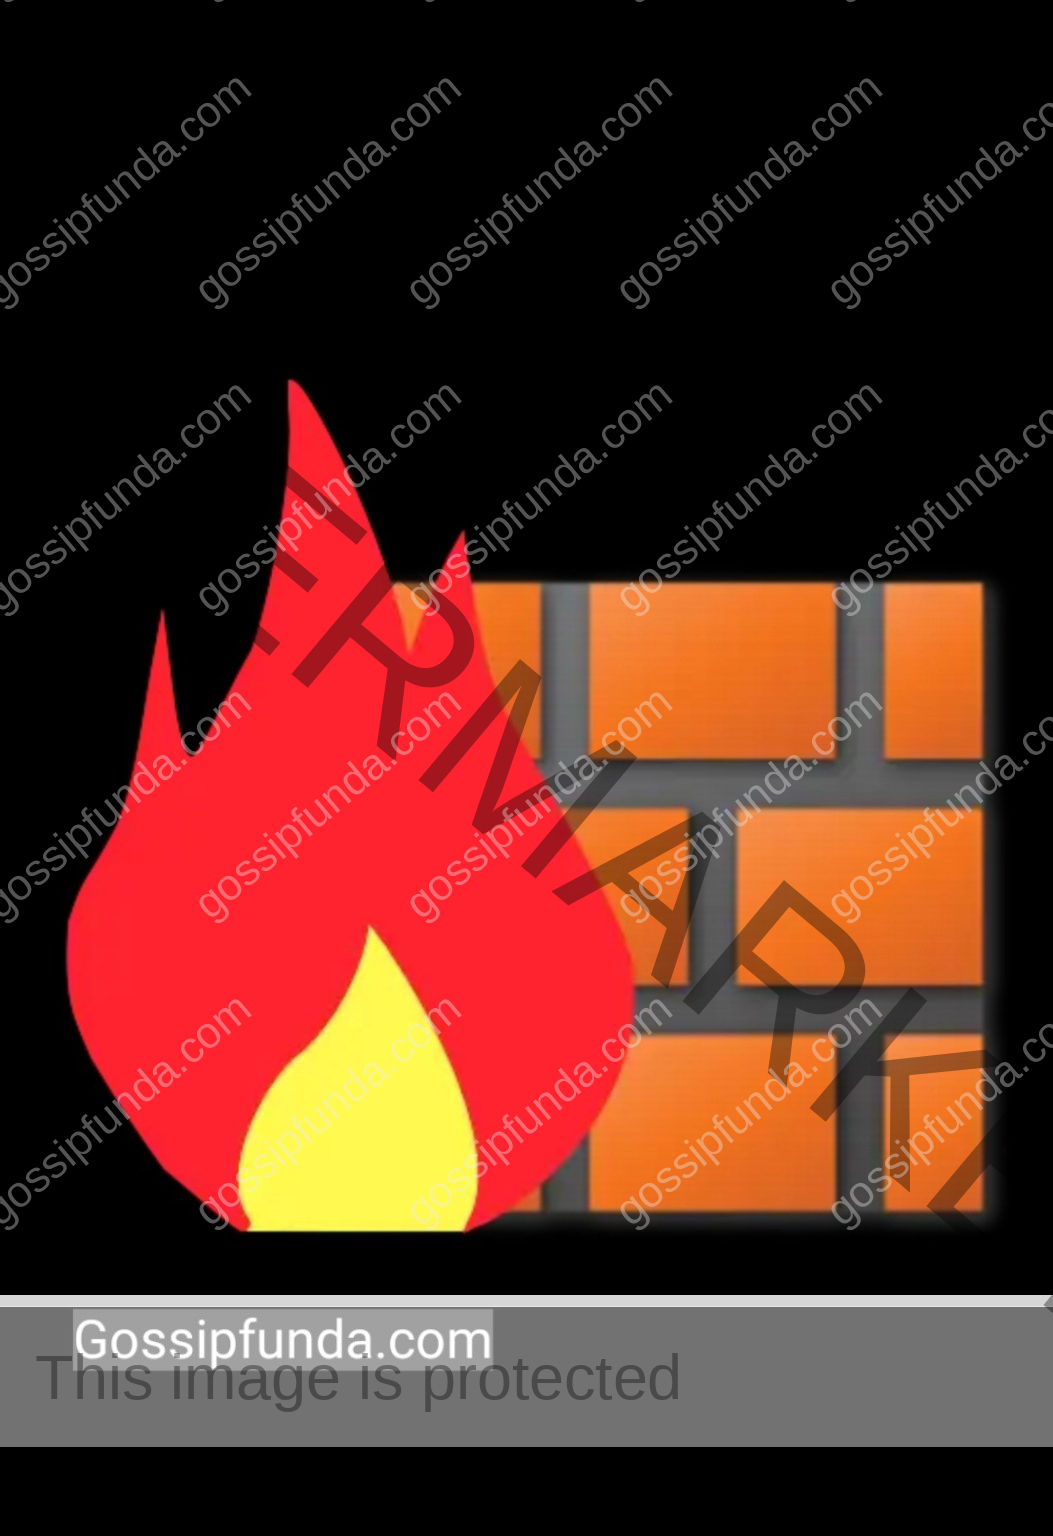 download the new for android Fort Firewall 3.9.7